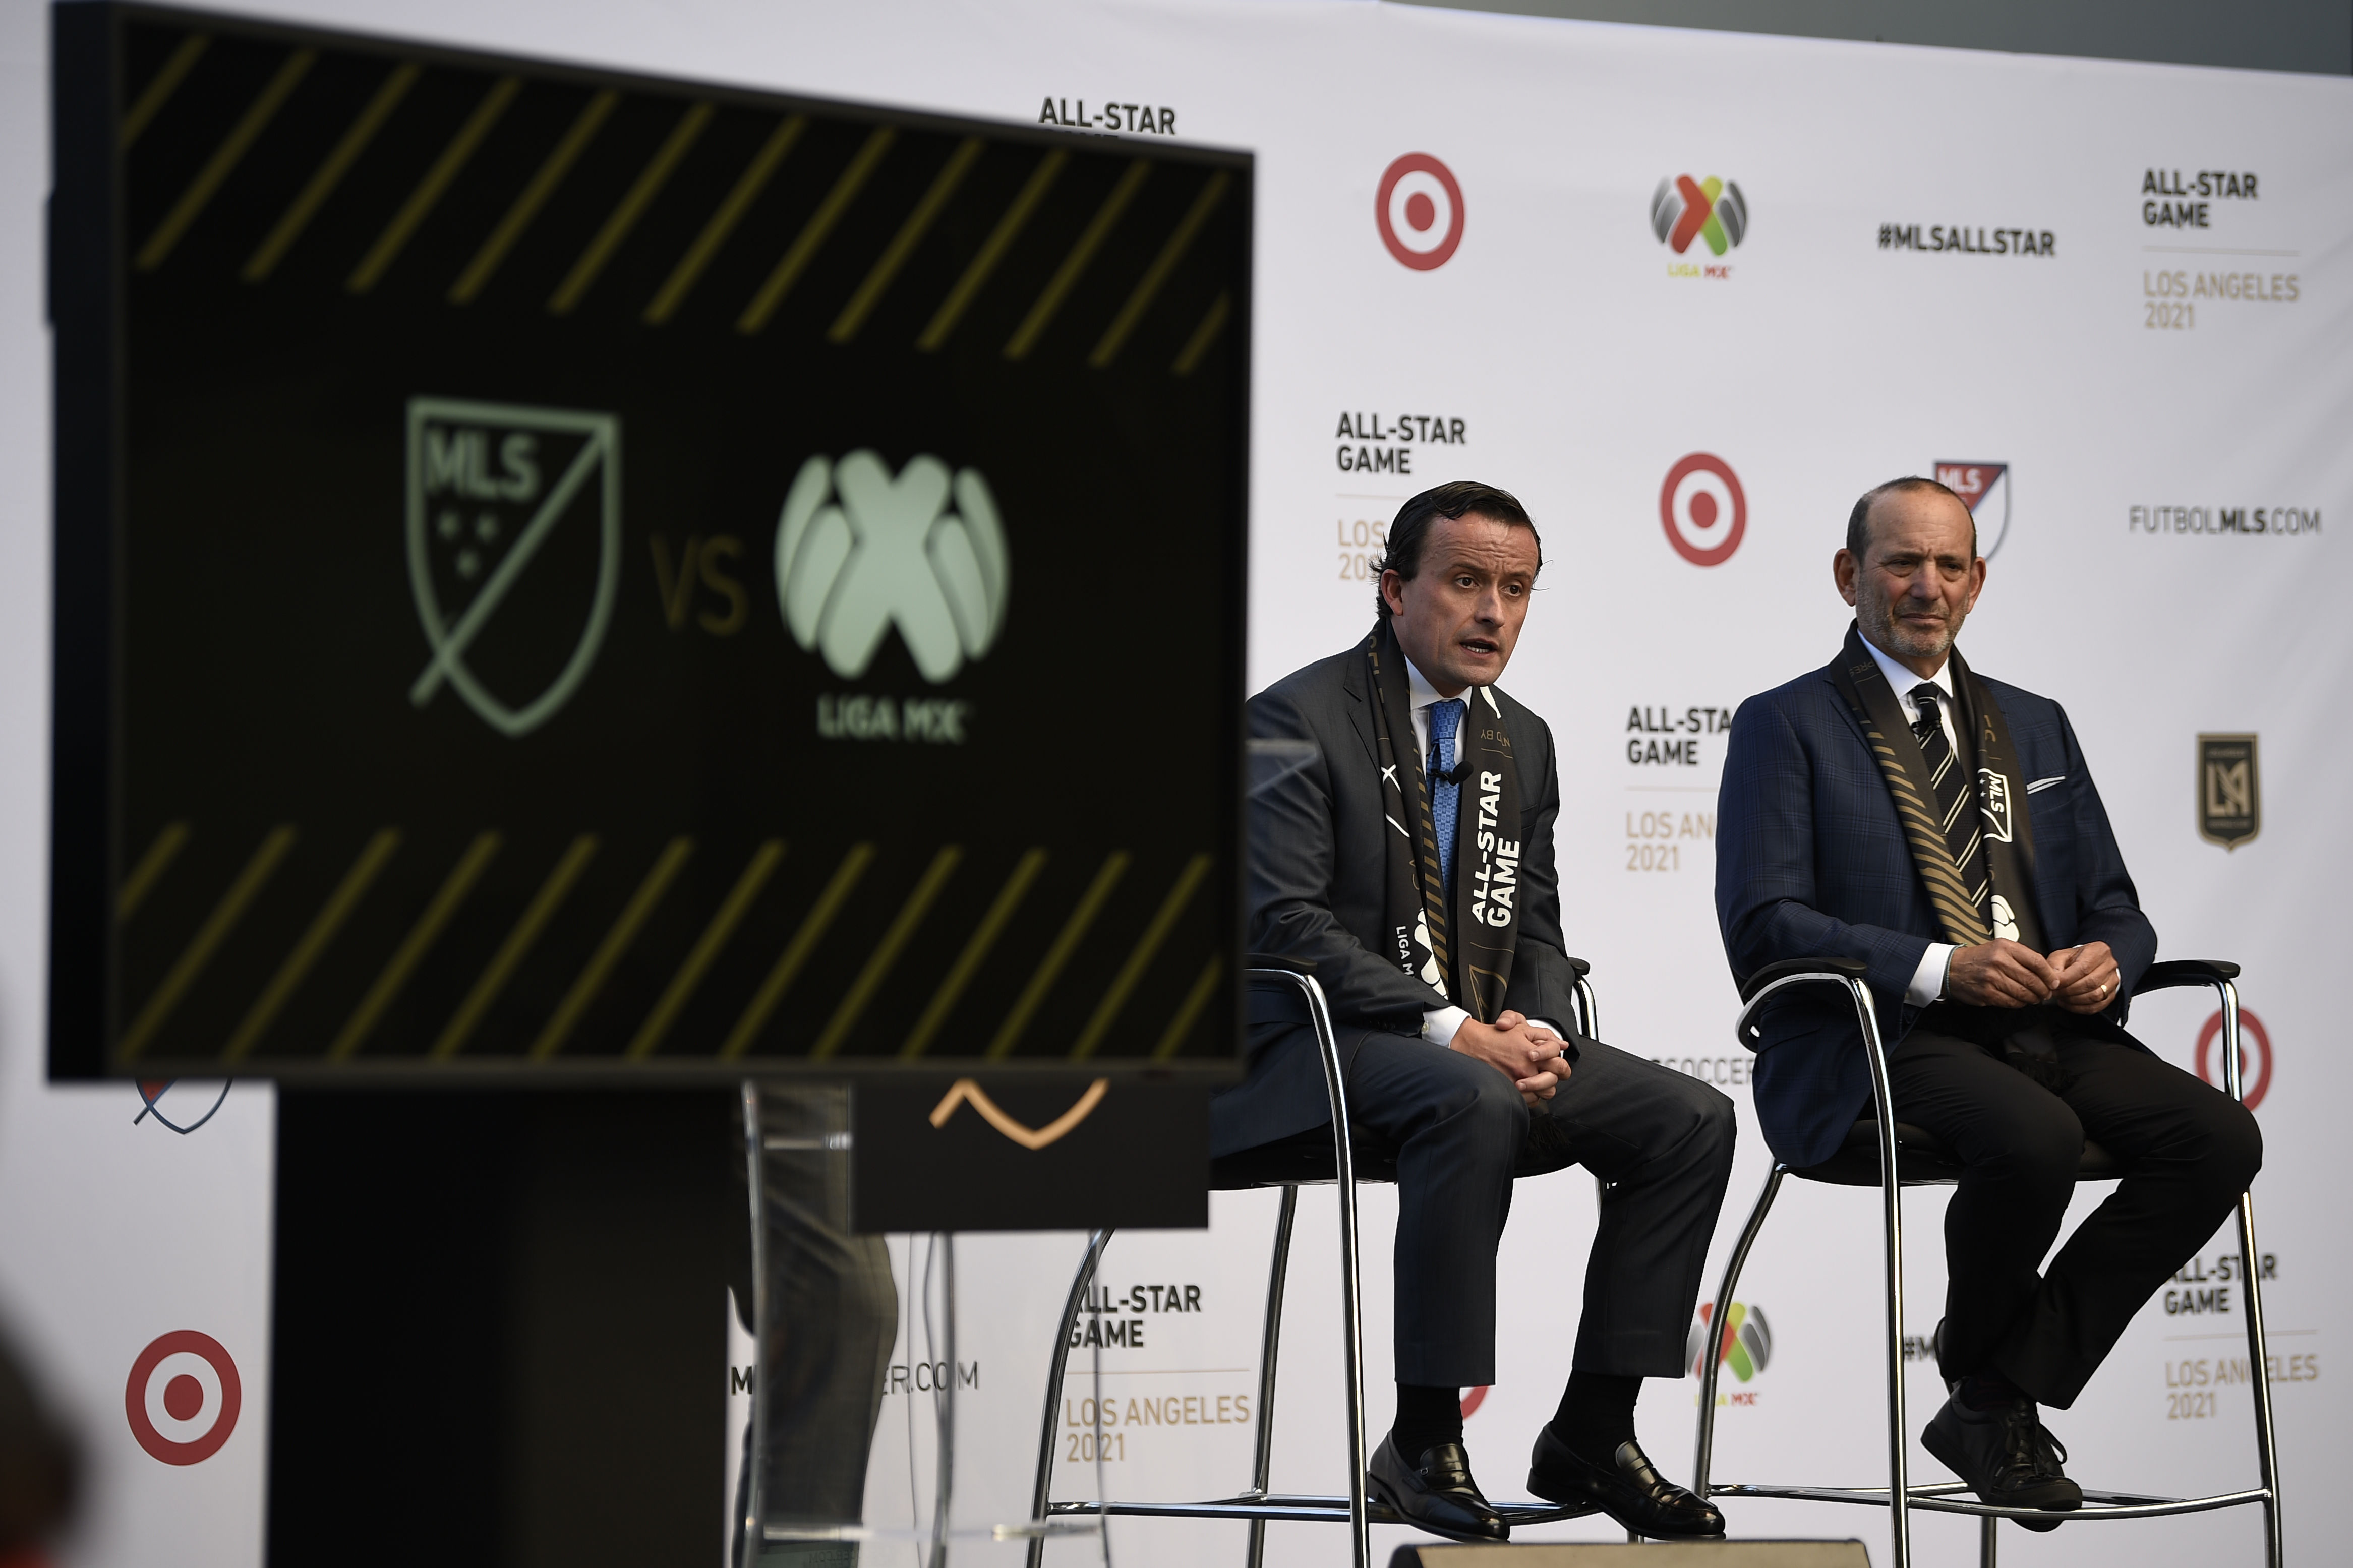 Jun 9, 2021; Los Angeles, CA, USA; MLS Commissioner Don Garber (right) and LIGA MX Executive President Mikel Arriola answer questions from the press after announcing the location of the 2021 MLS All-Star Game to be held at Banc of California Stadium. Mandatory Credit: Kelvin Kuo-USA TODAY Sports